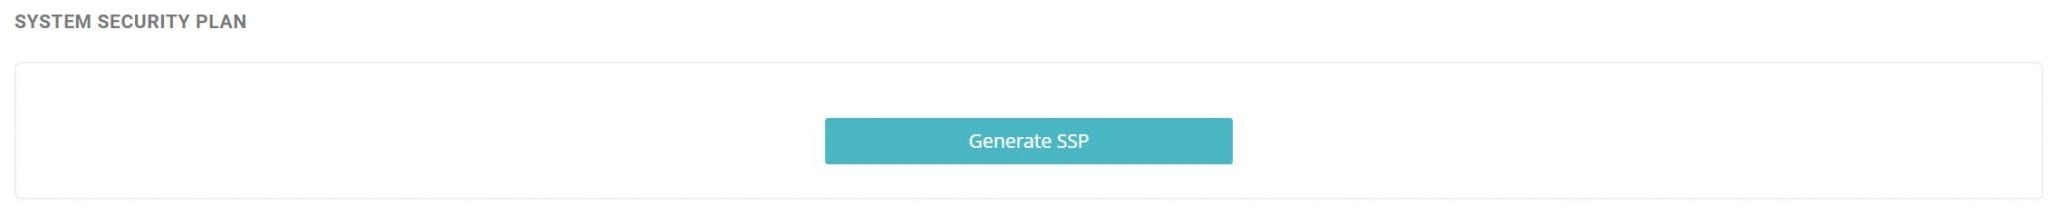 ComplyUp Nist 800-171 Compliance Generate SSP